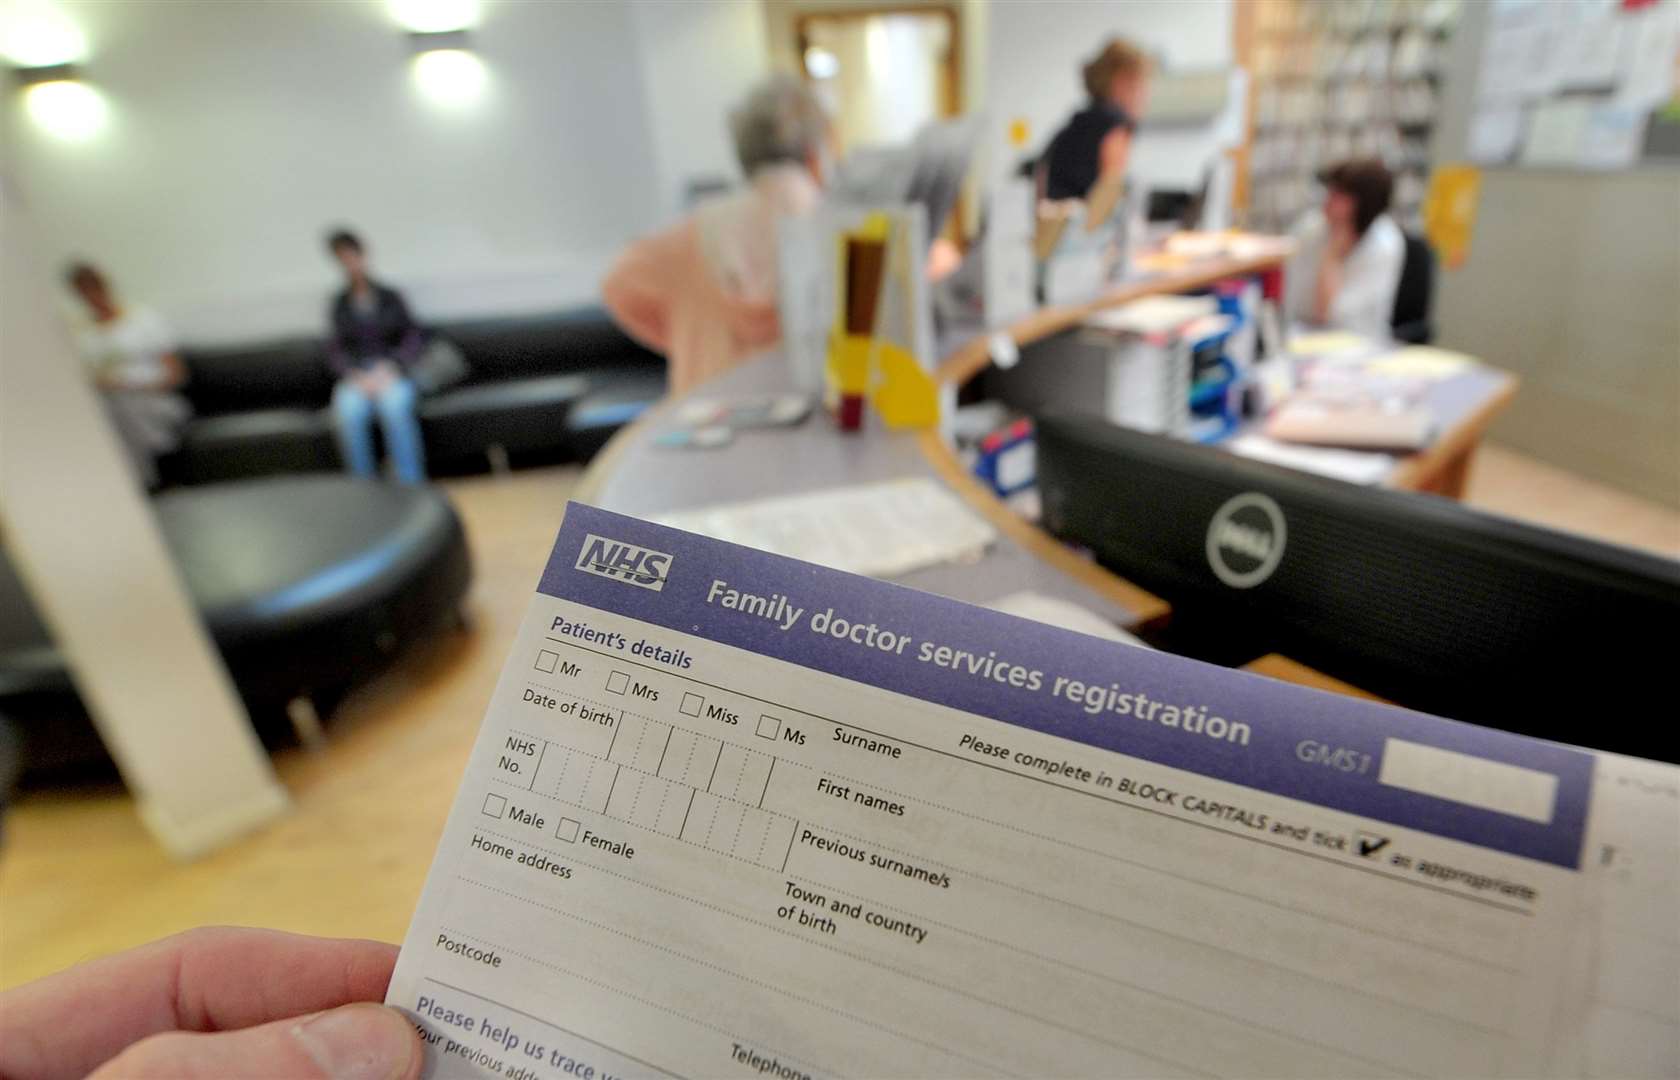 North West London Integrated Care System (ICS) said the so-called same-day access hubs will bolster access to primary care (Anthony Devlin/PA)